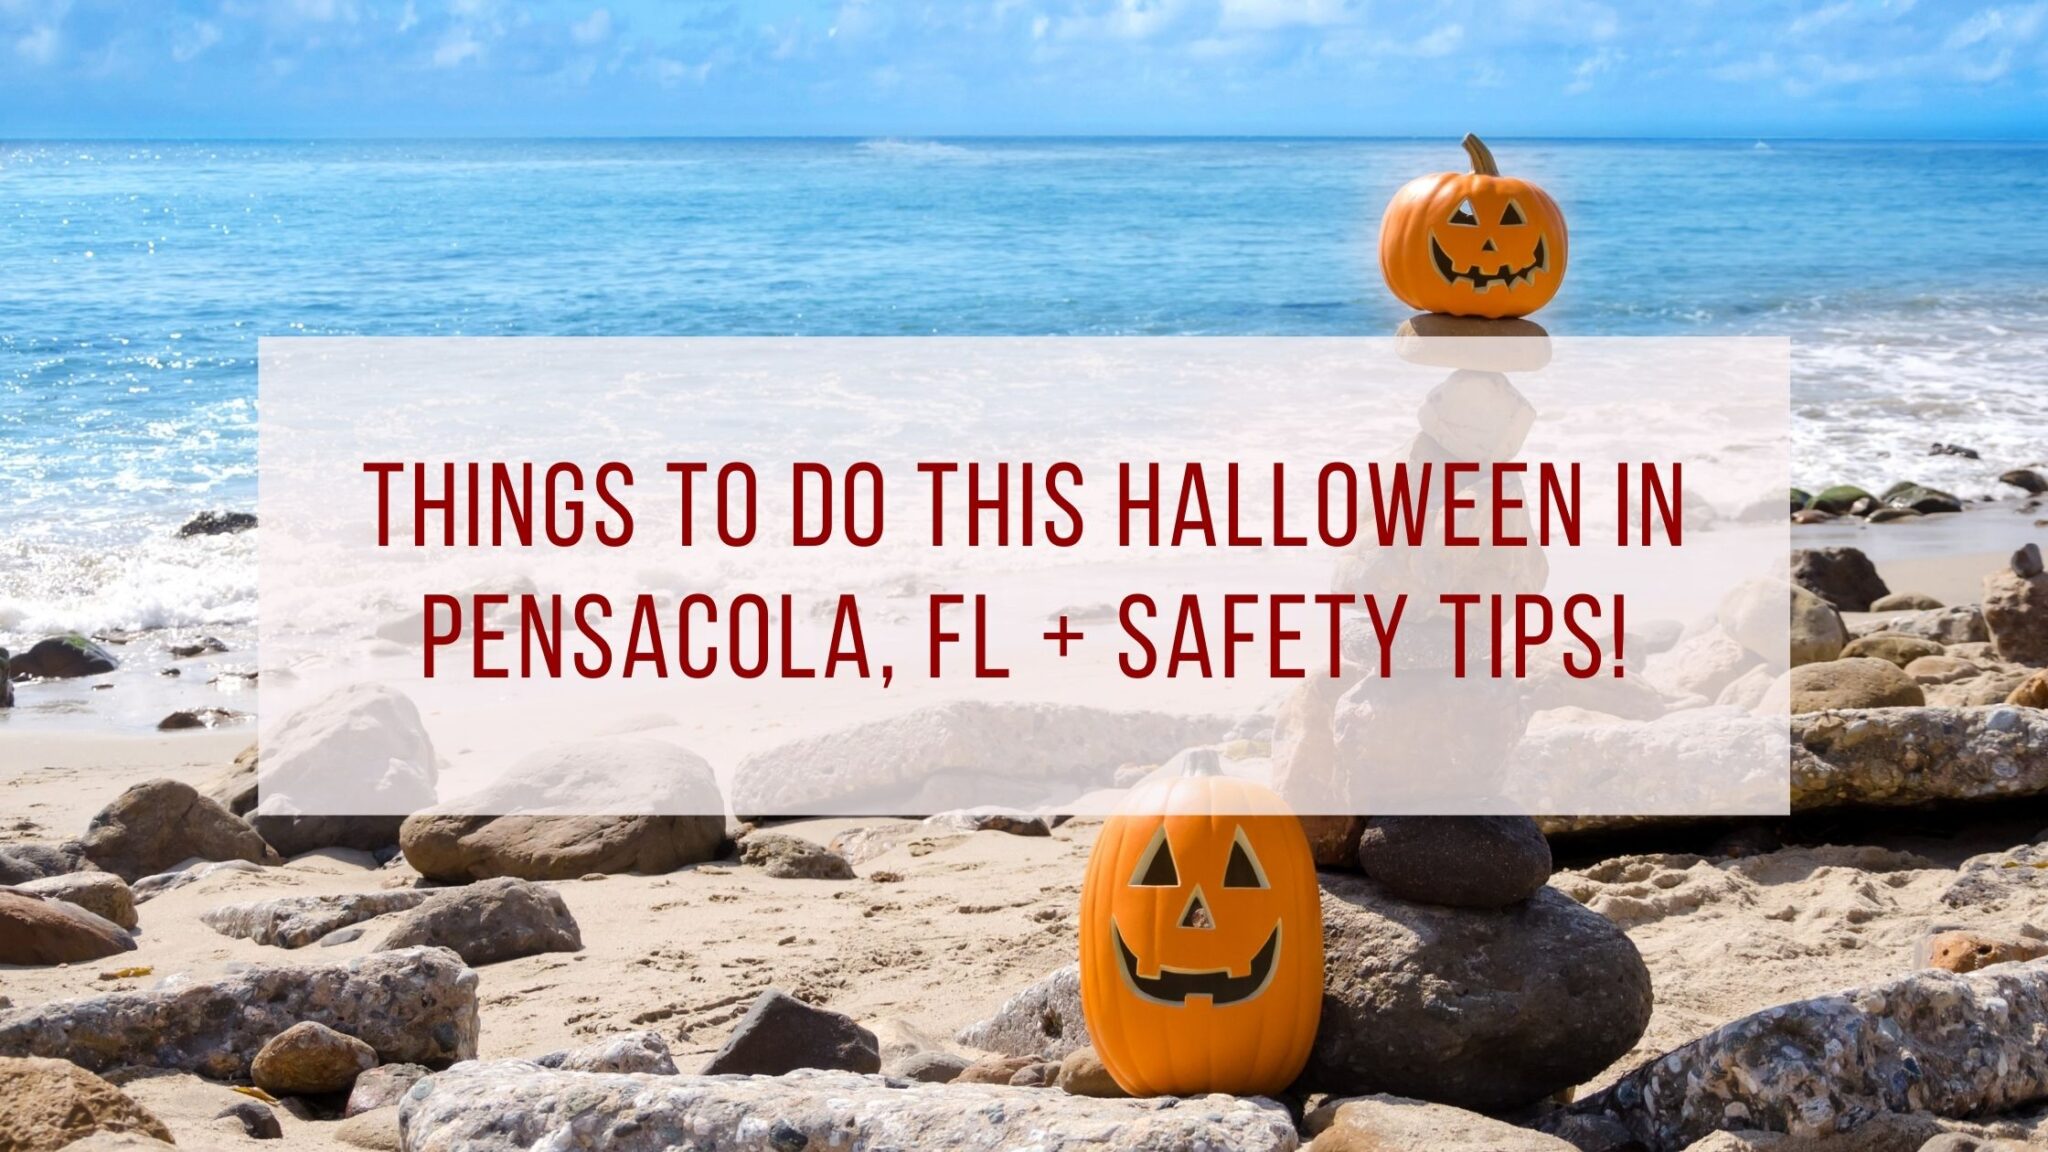 Things To Do This Halloween In Pensacola, FL + Safety Tips!